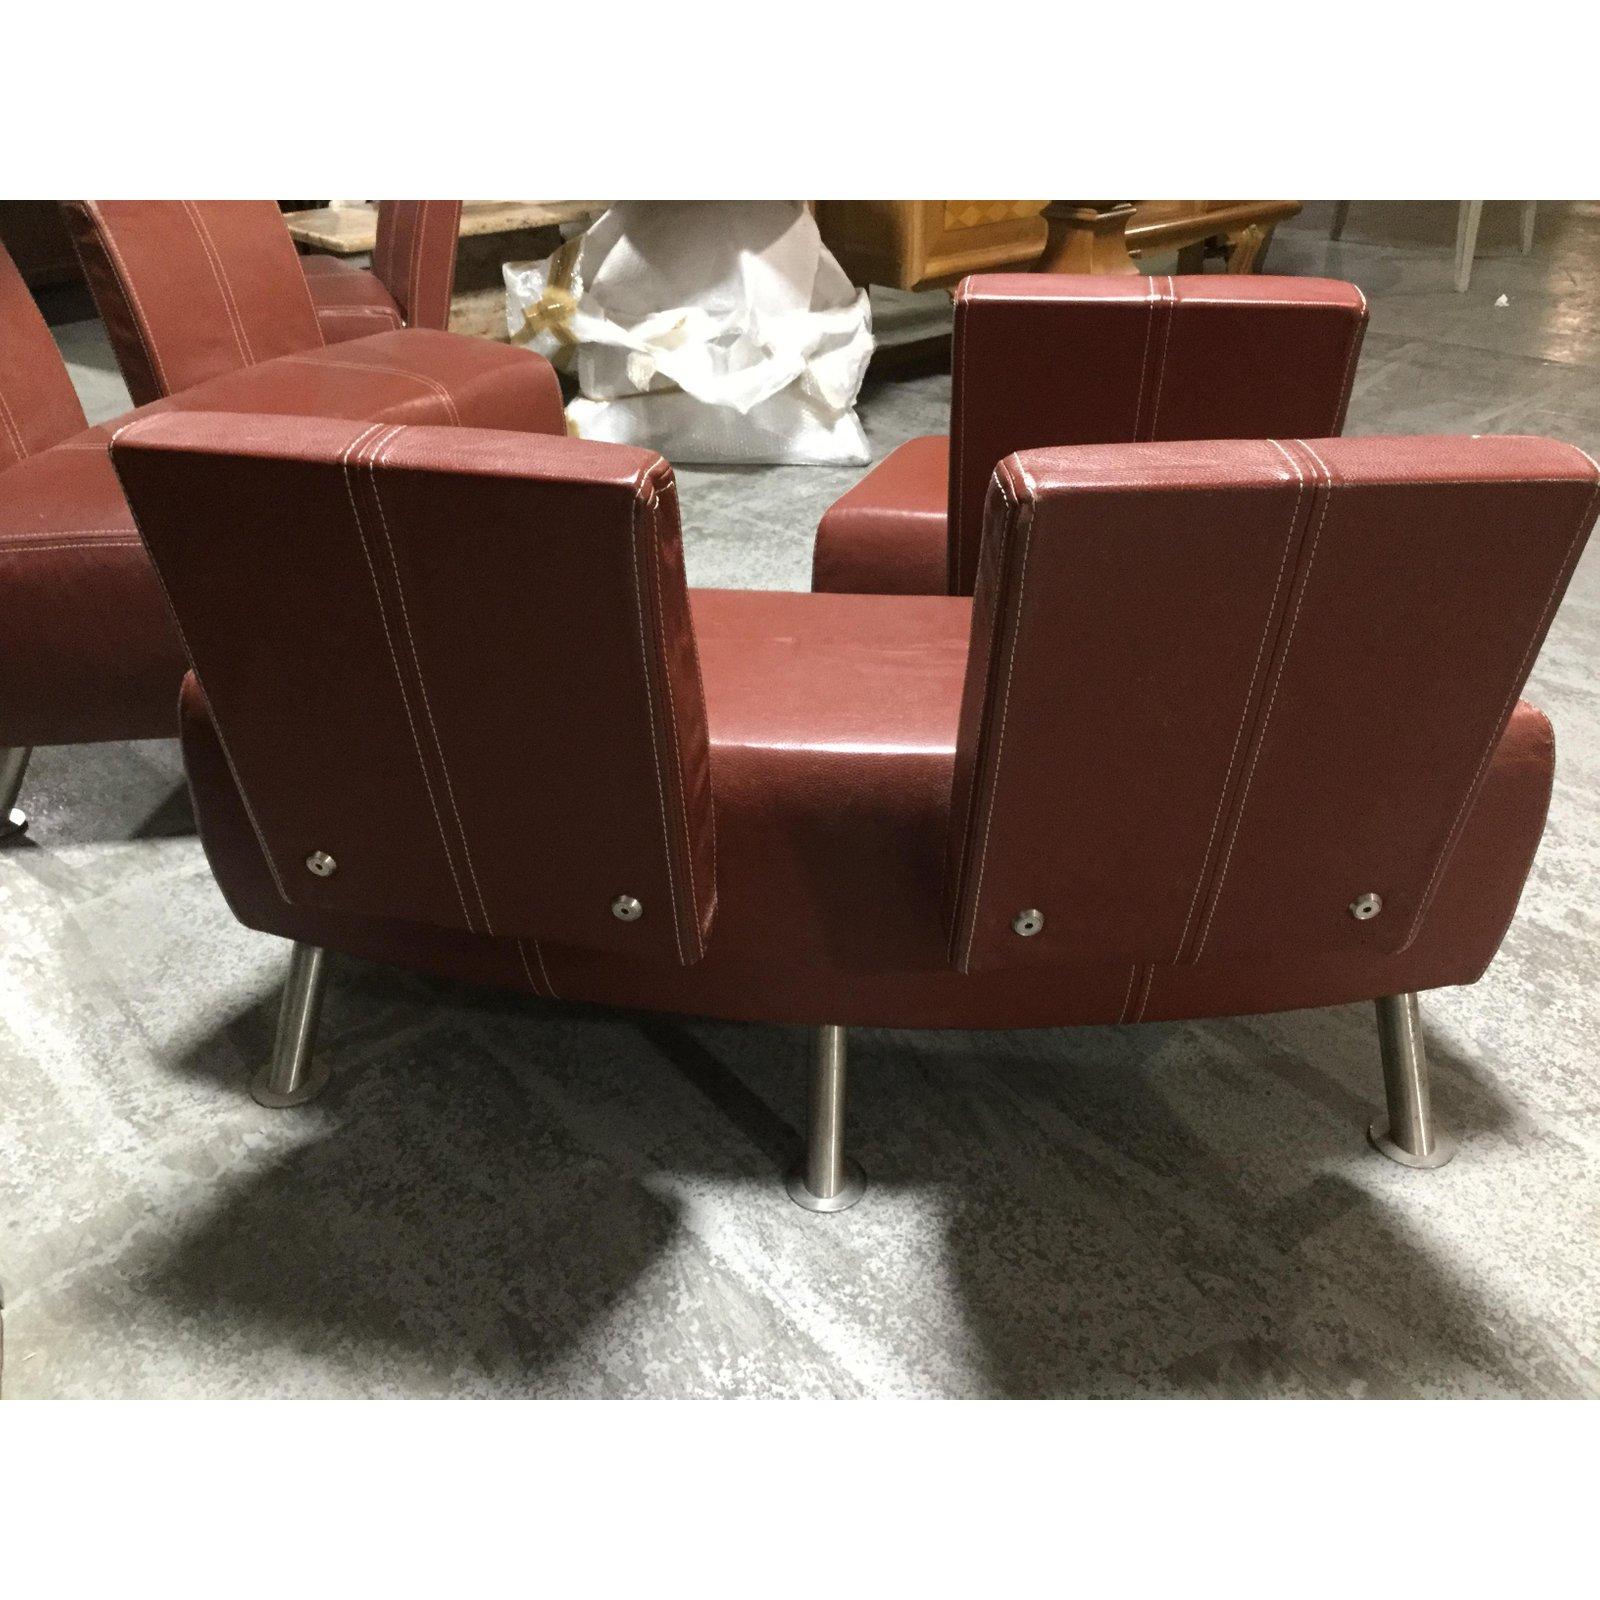 Steel Chic Italian Industrial Leather Salon Set with Two Chairs and Loveseat